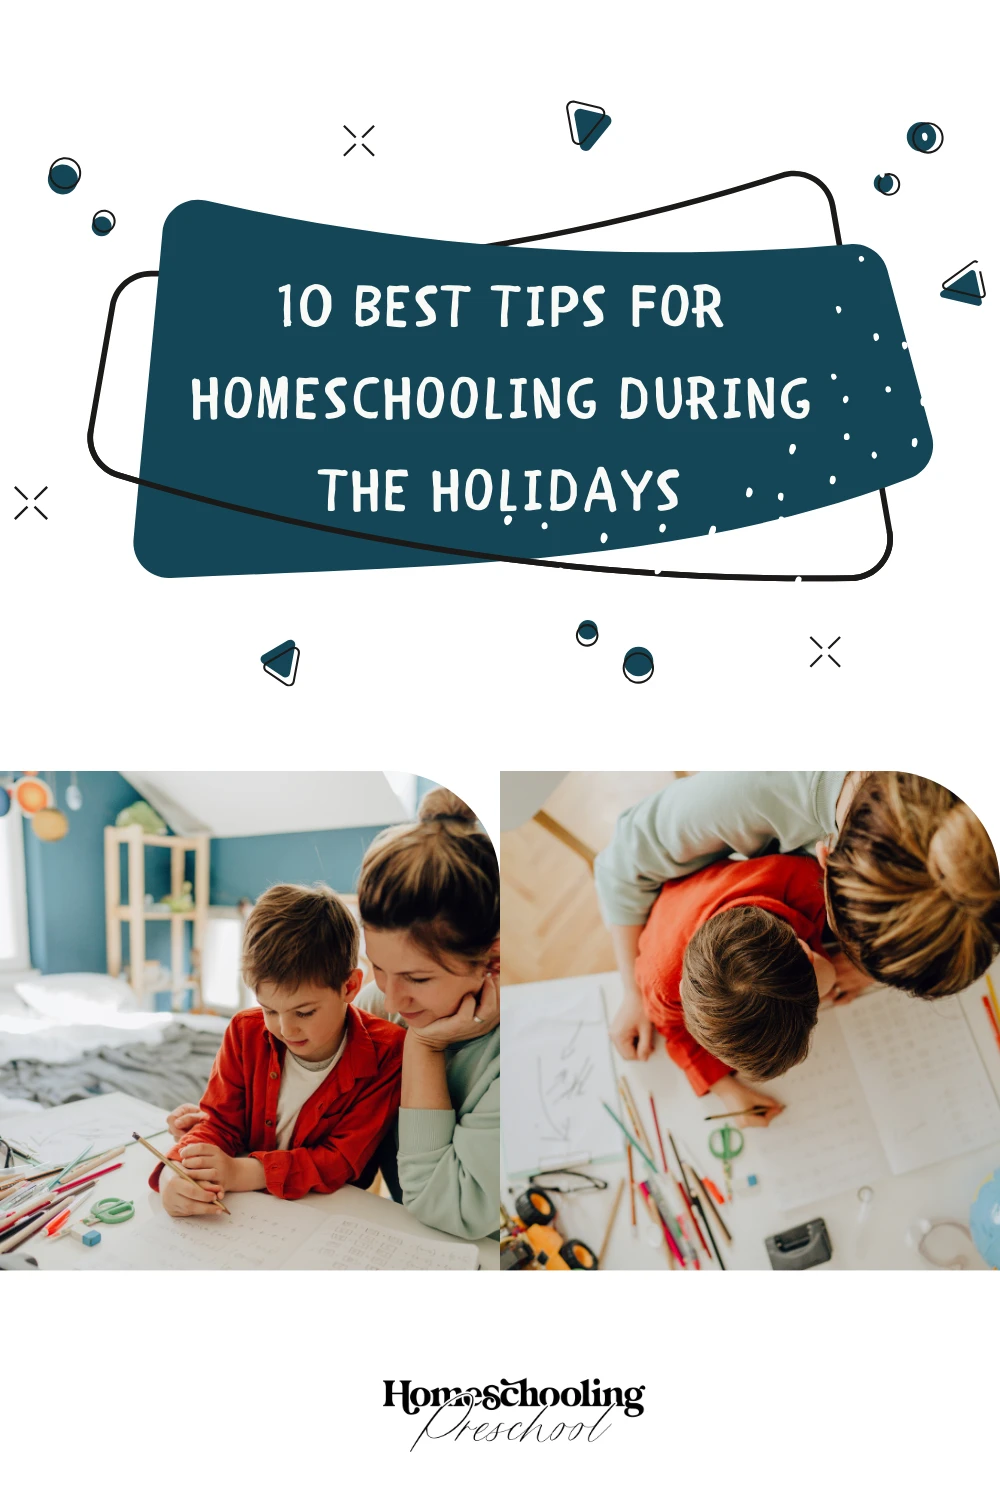 10 Best Tips for Homeschooling During the Holidays